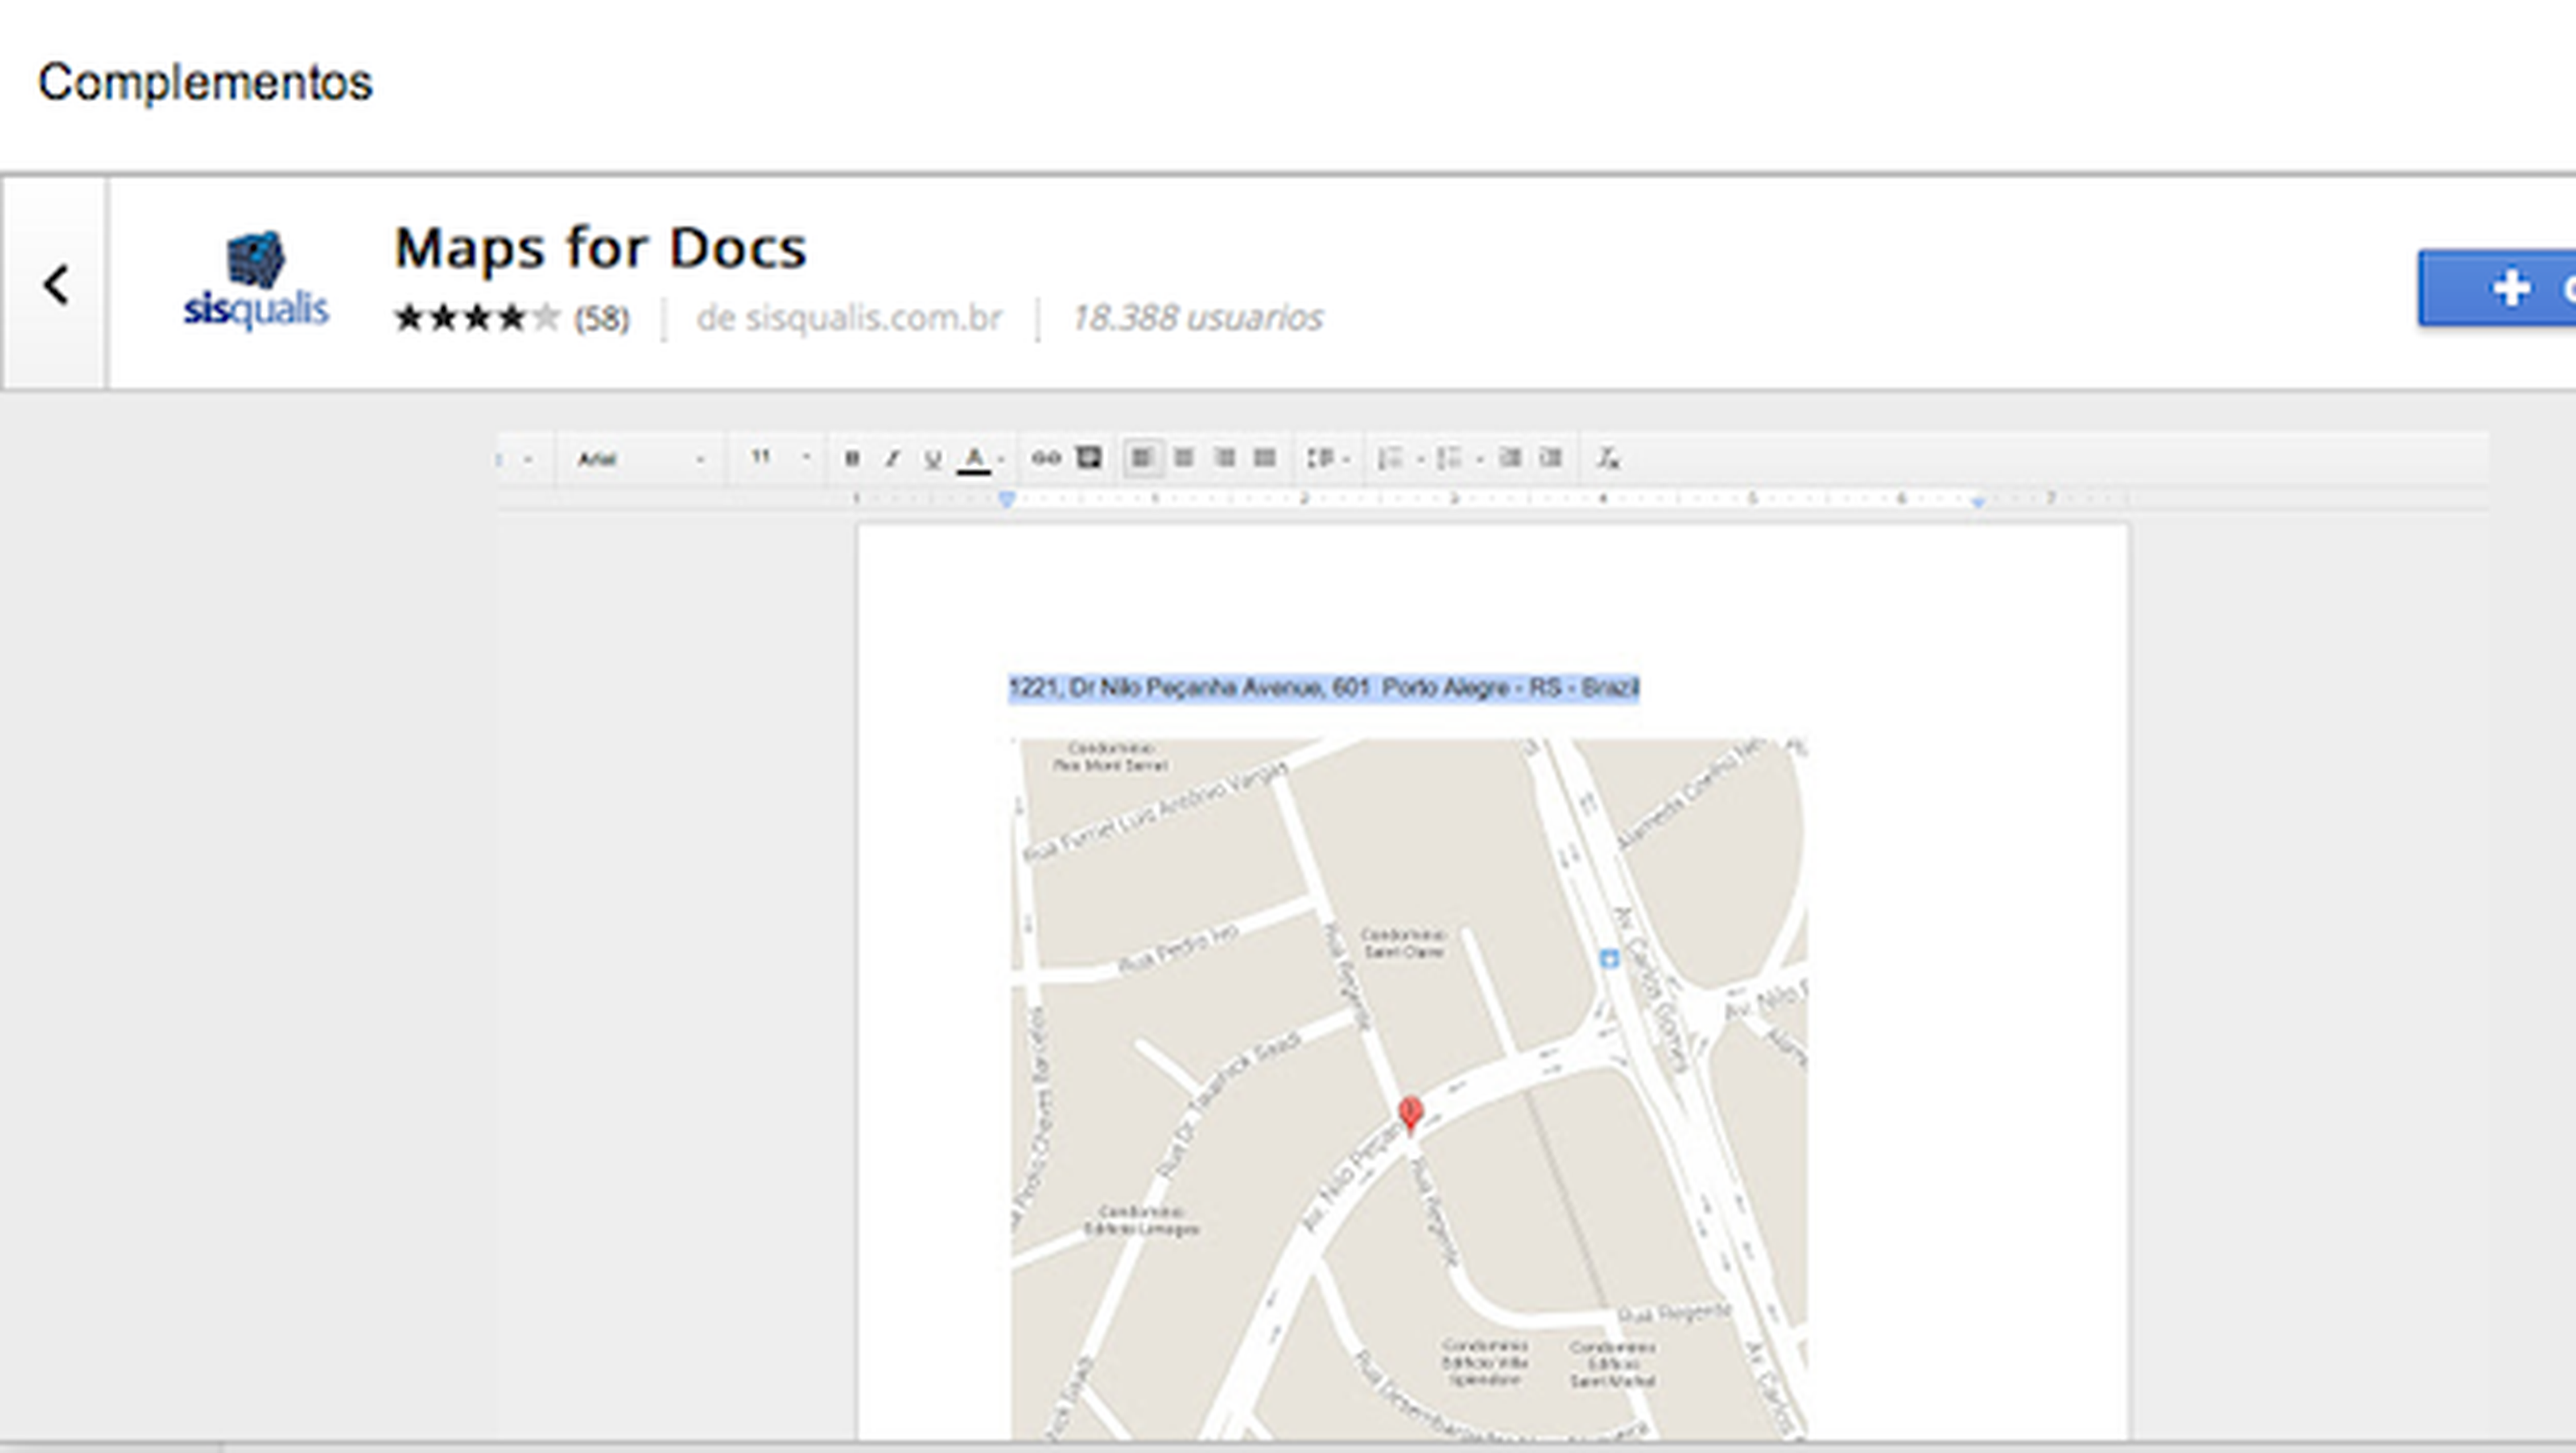 Maps for Docs